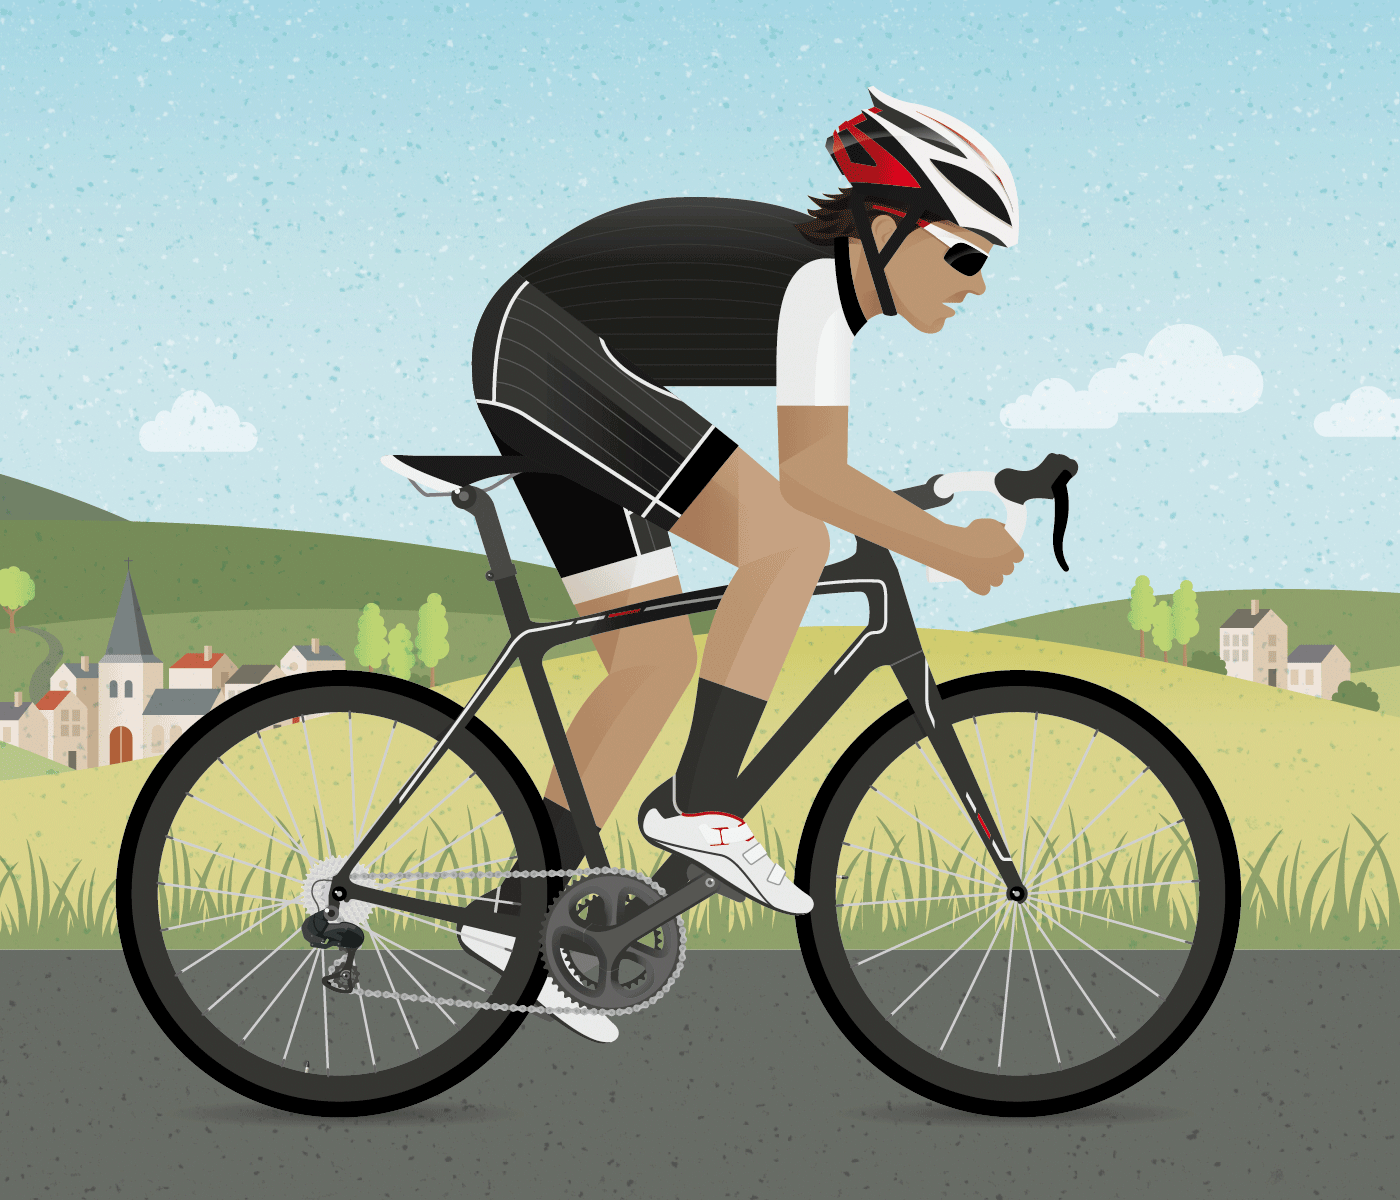 Detail of the infographic illustration for the Titanen Fabian Cancellara edition